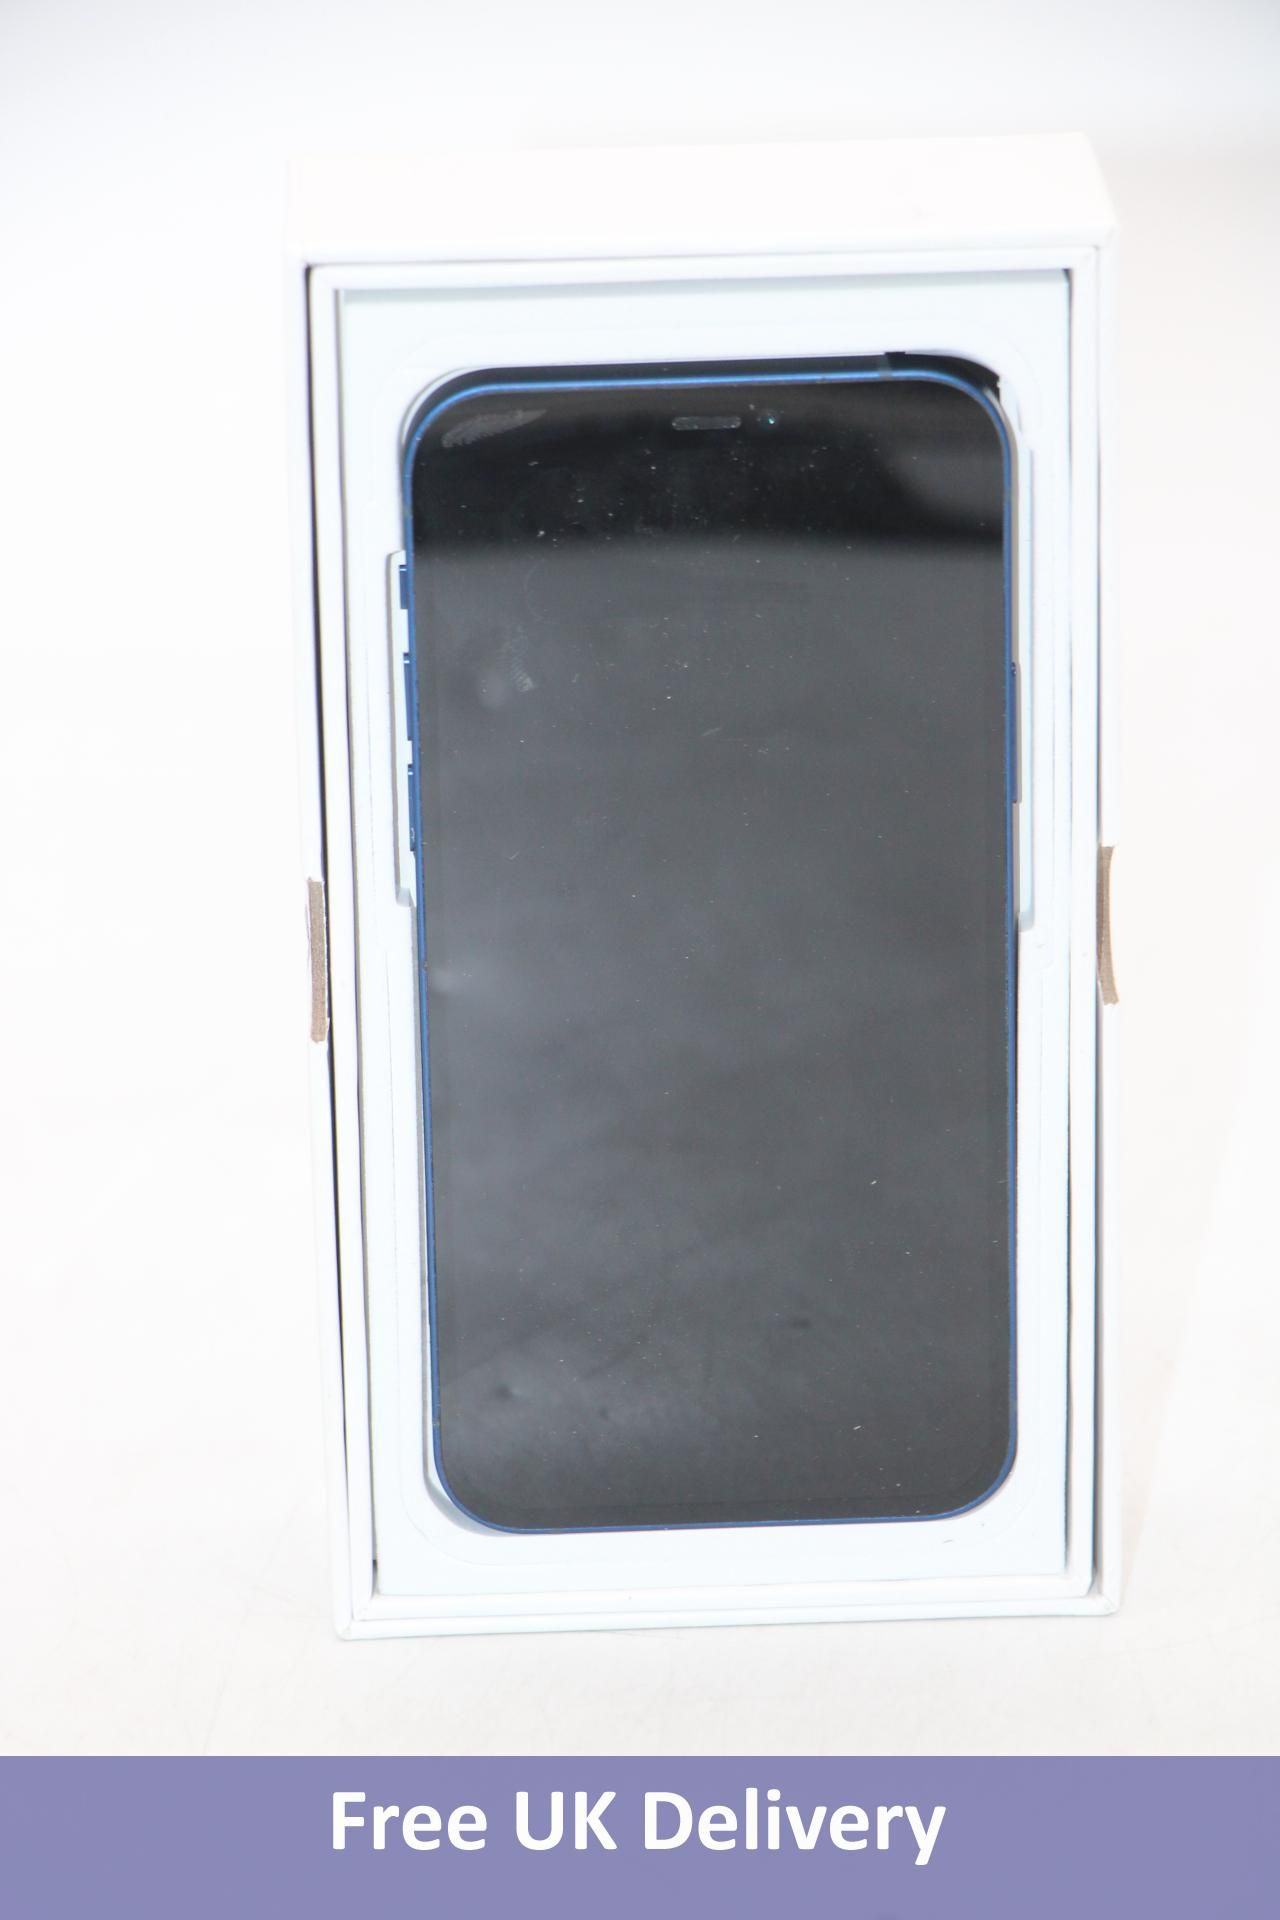 Apple iPhone 12, 256GB, Blue. Used, damaged screen, no original box or accessories. Checkmend clear,